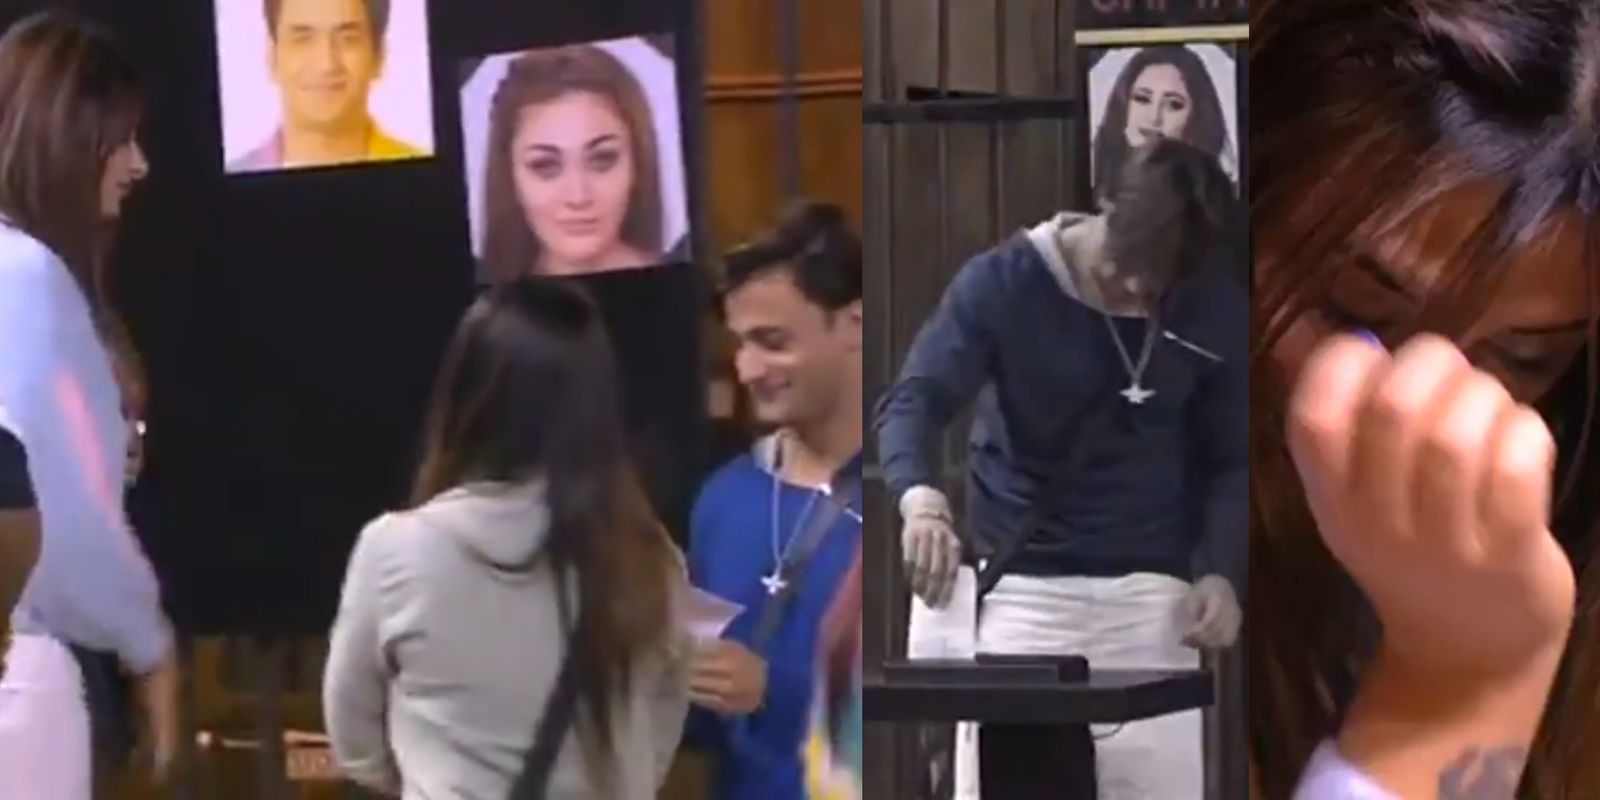 Bigg Boss 13 Preview: Mahira Gives Up Chance To Become Captain For Asim, He Shreds Her Mother's Letter In Return!